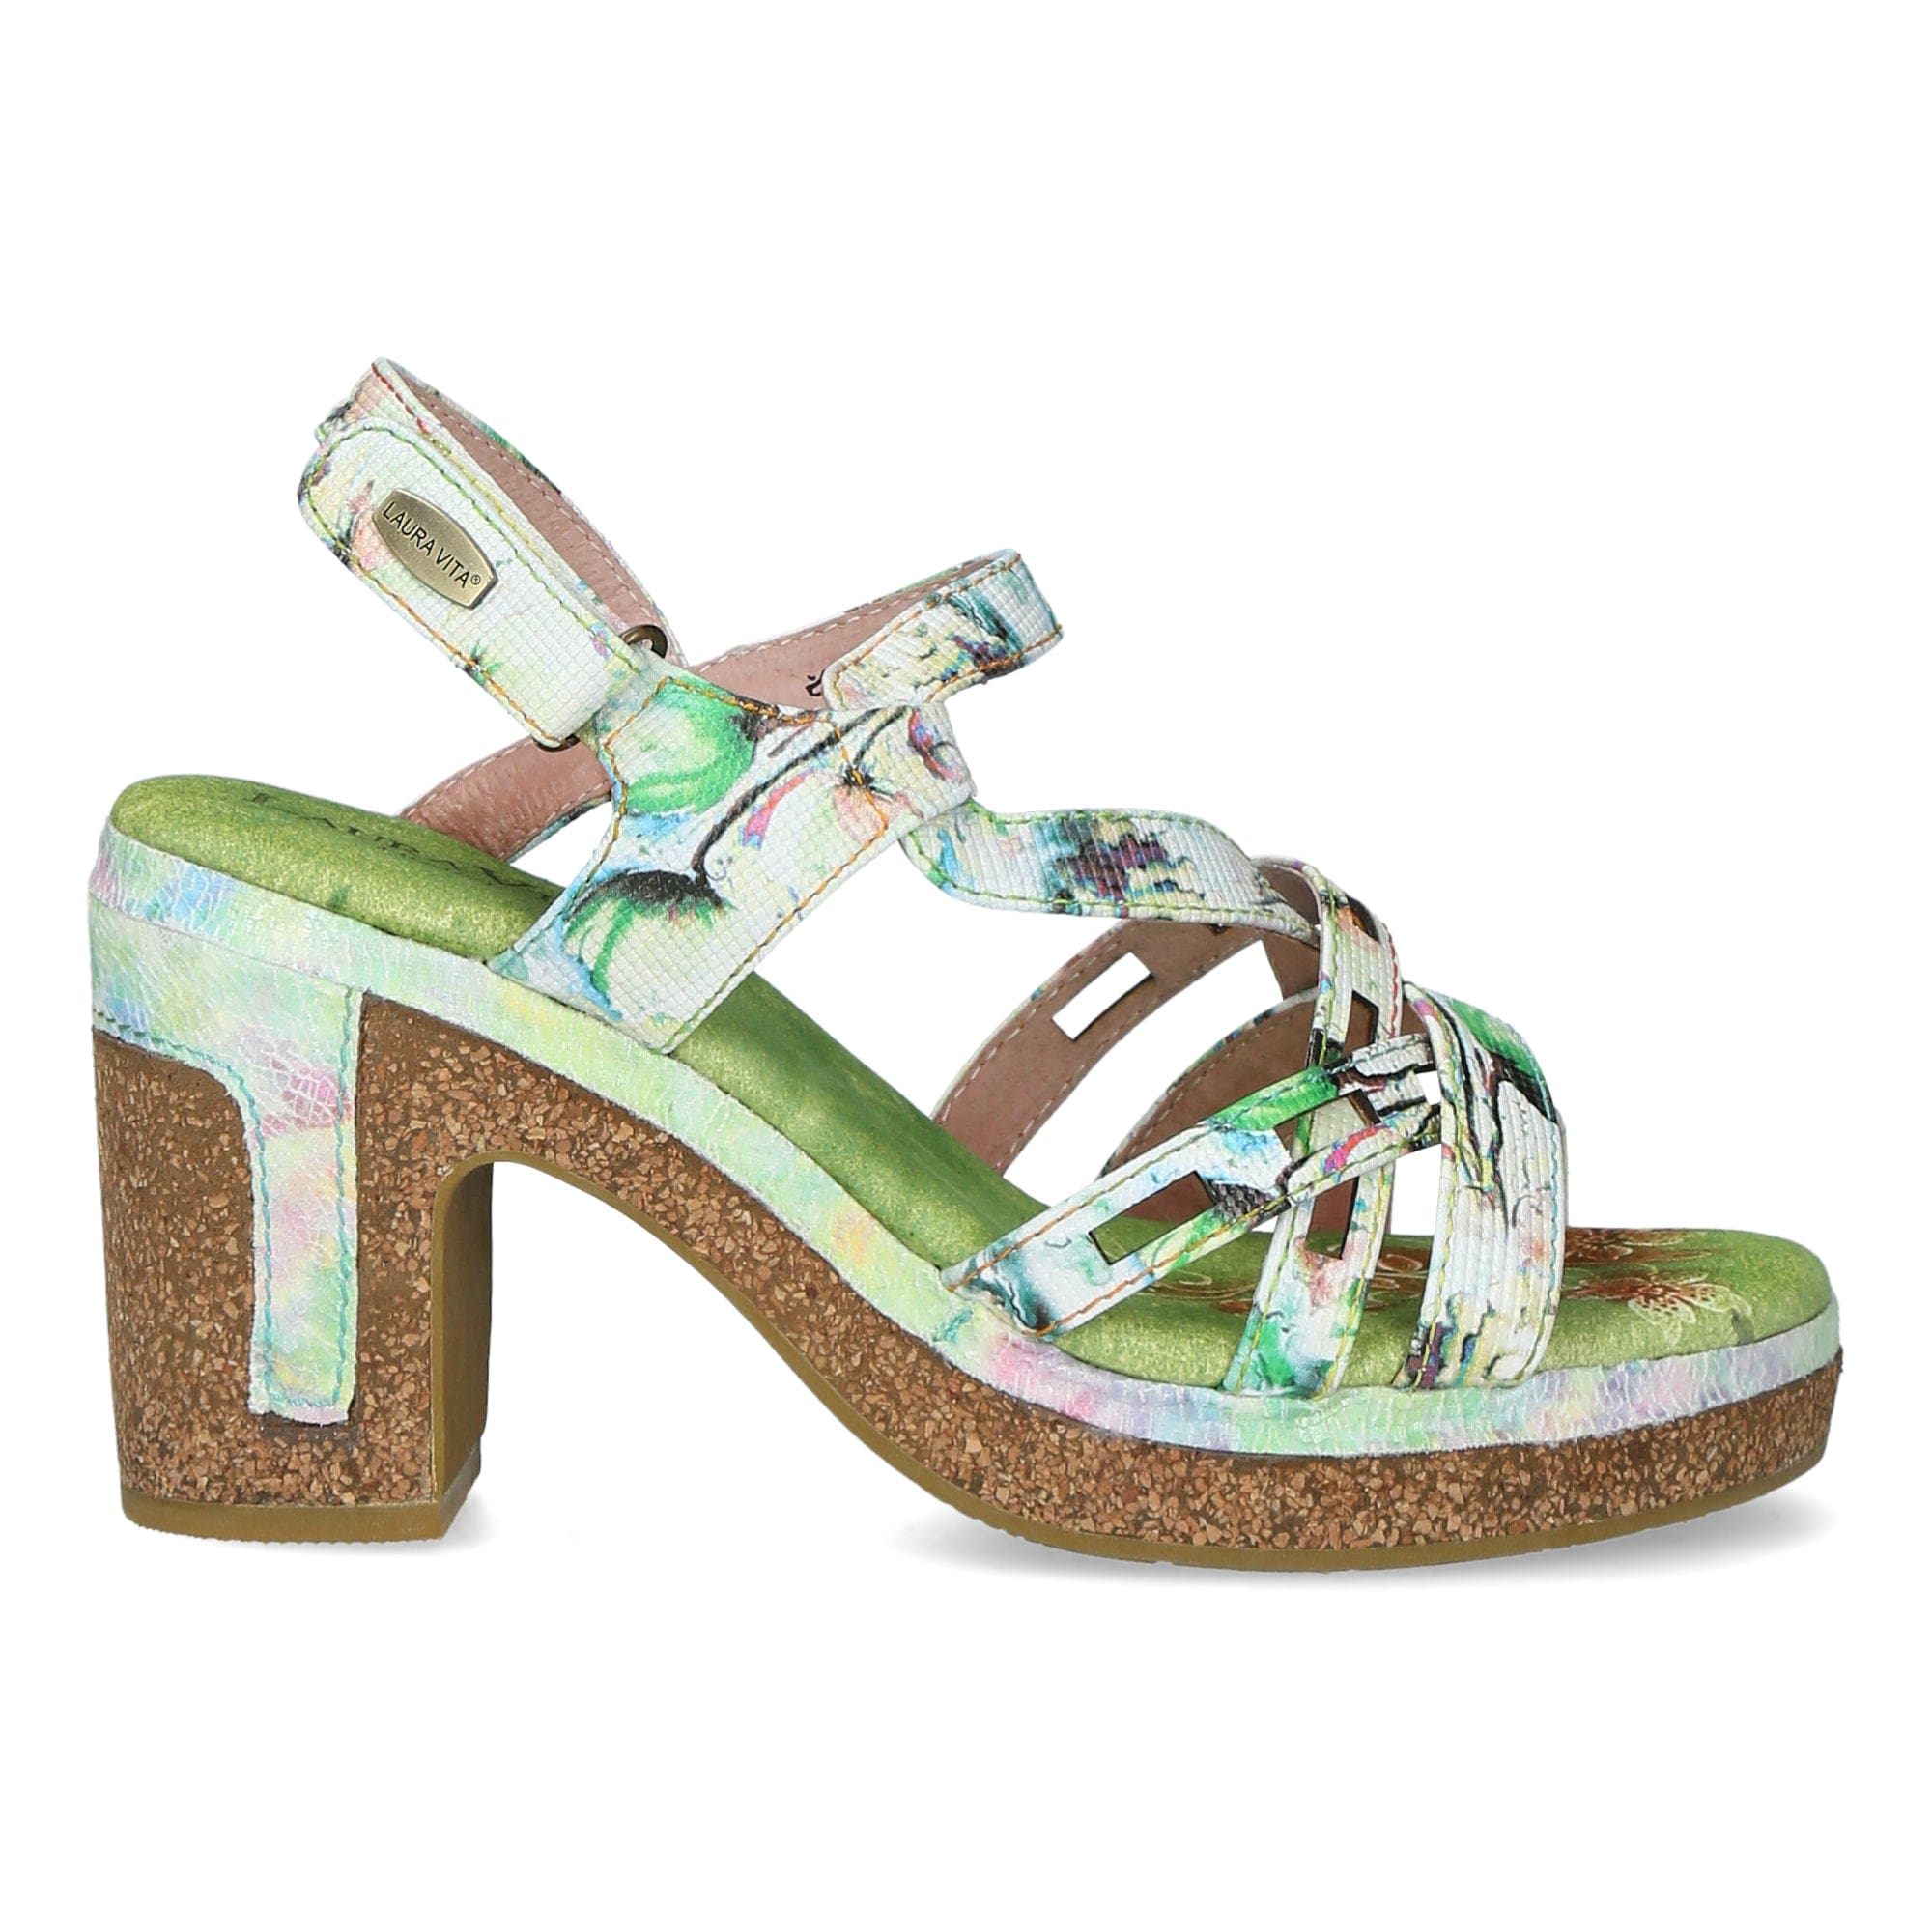 HECALO 1122 shoes - 35 / Green - Sandal